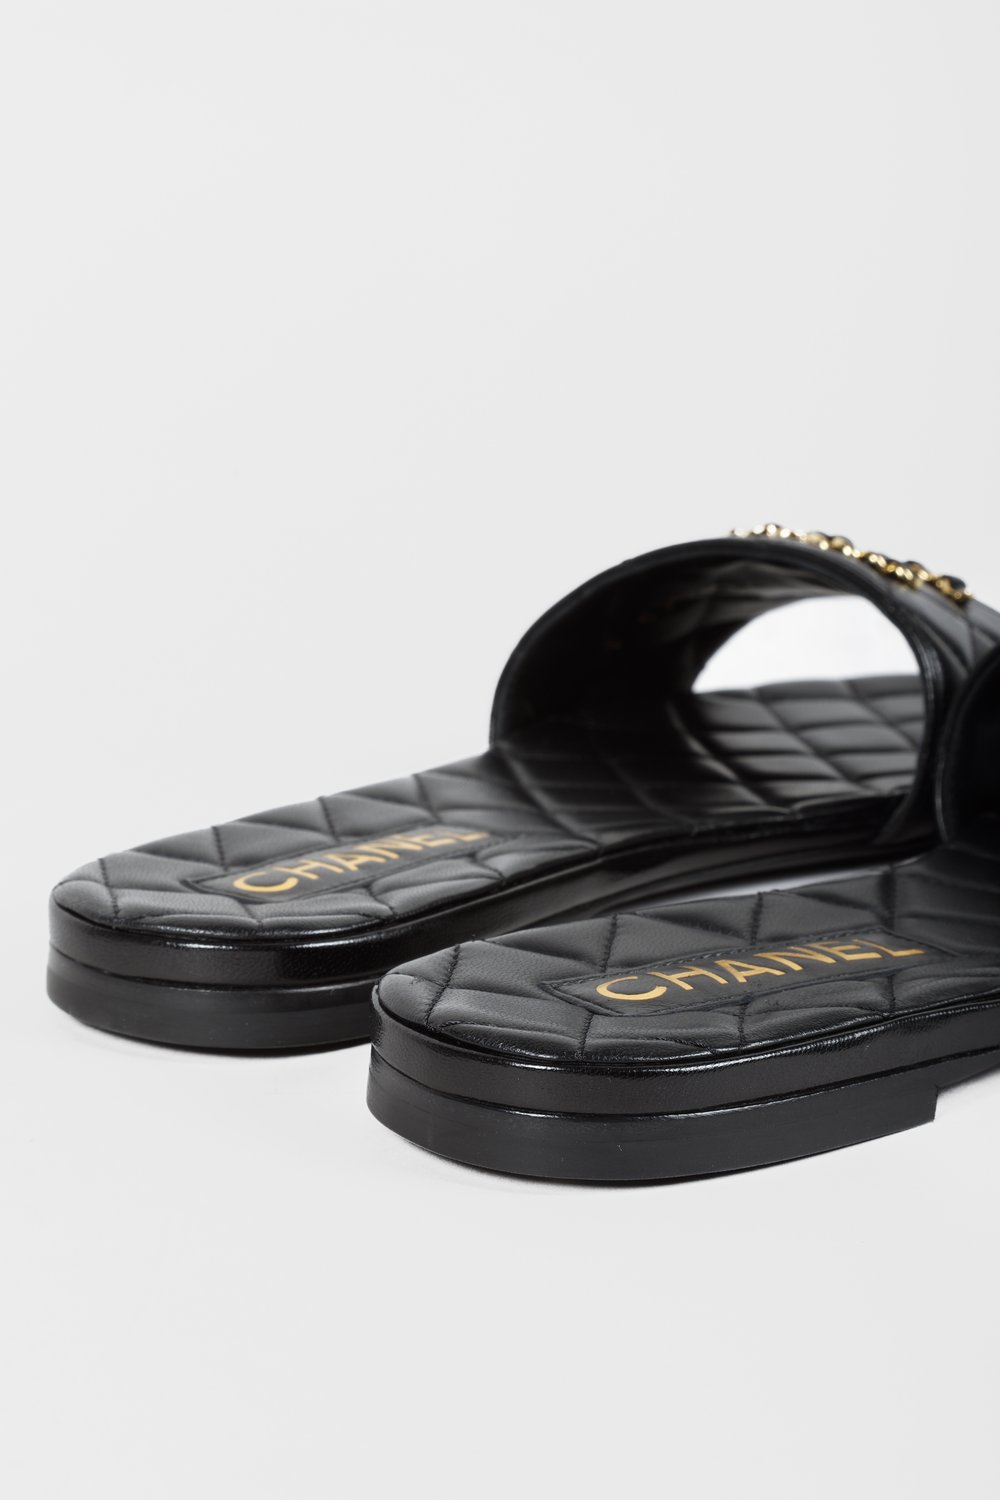 Chanel 23P Black Quilted CC Chain Mule Sandal — BLOGGER ARMOIRE